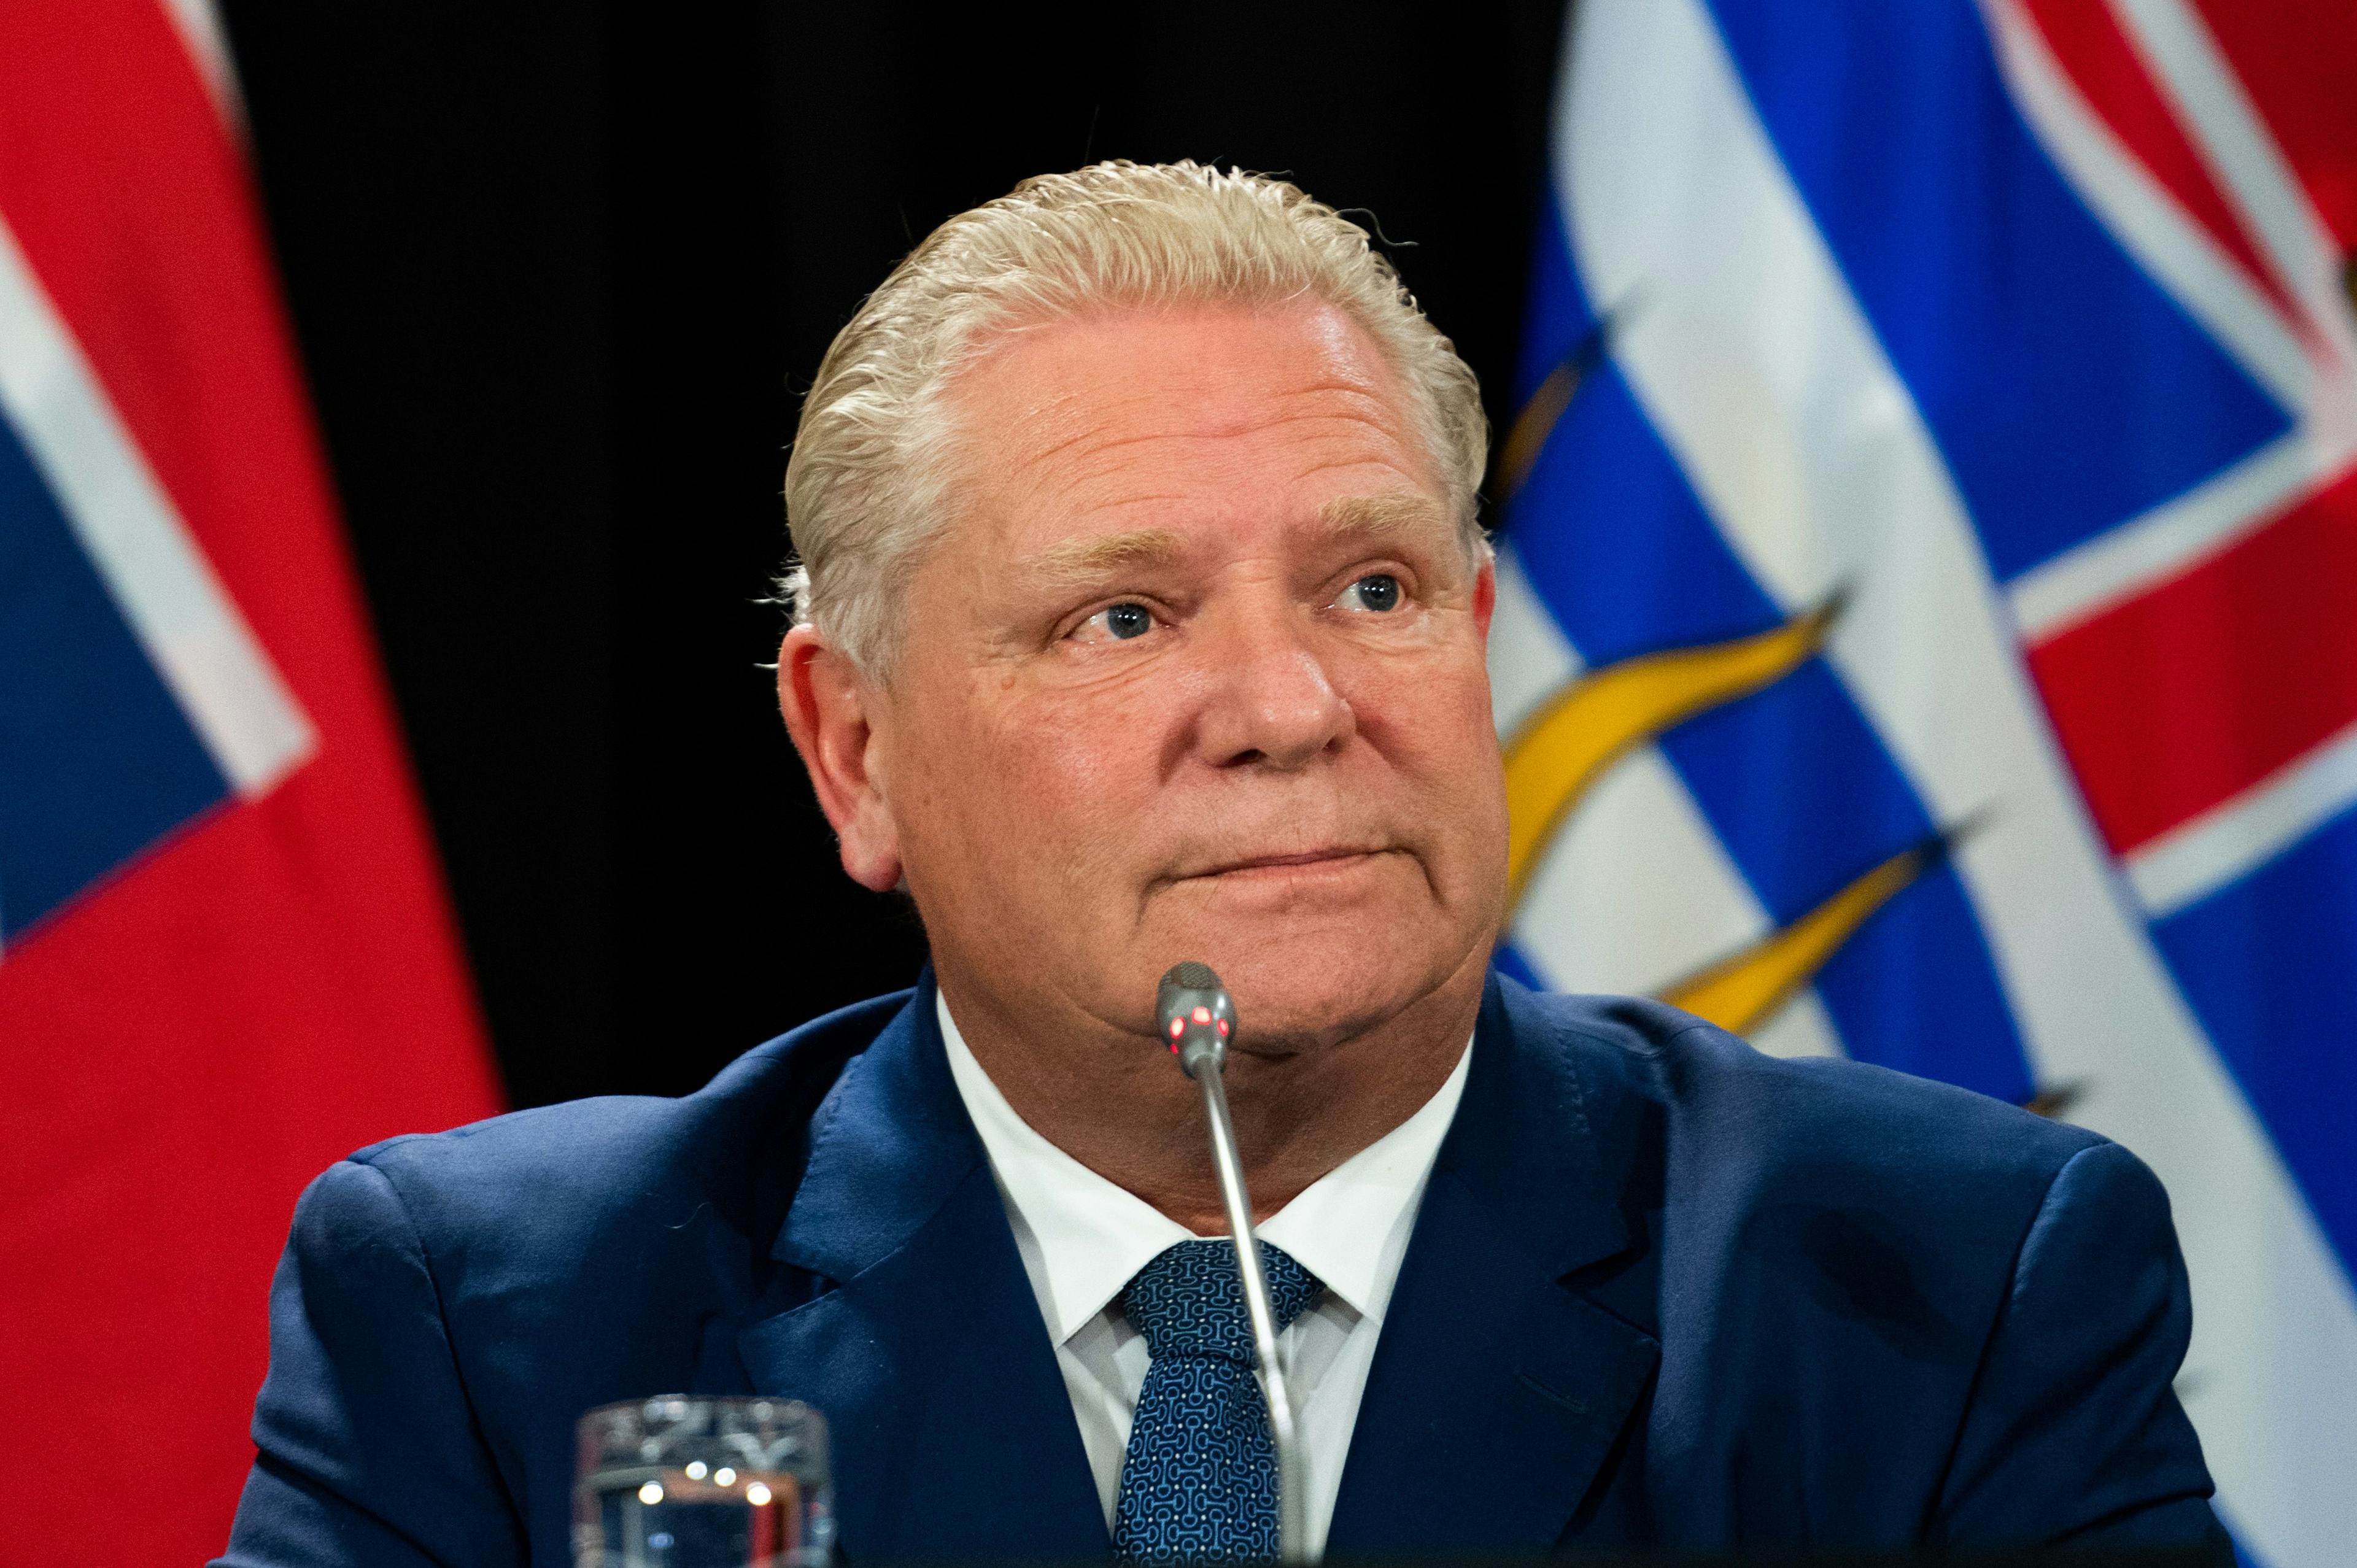 CSIS briefed Ontario premier’s office on potential Chinese interference: Ford